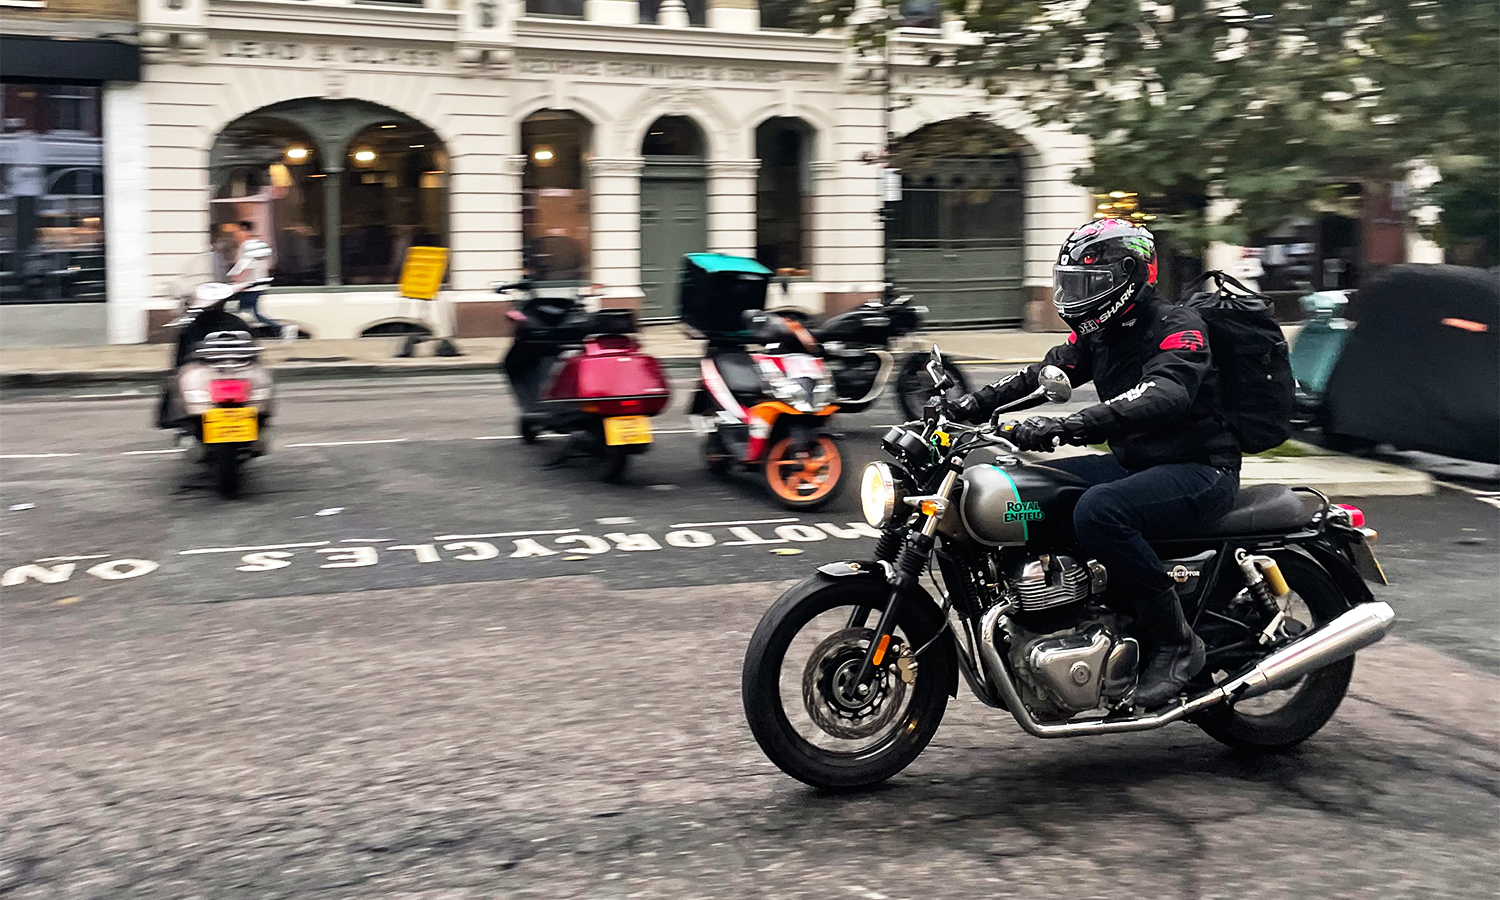 A motorbike in central London